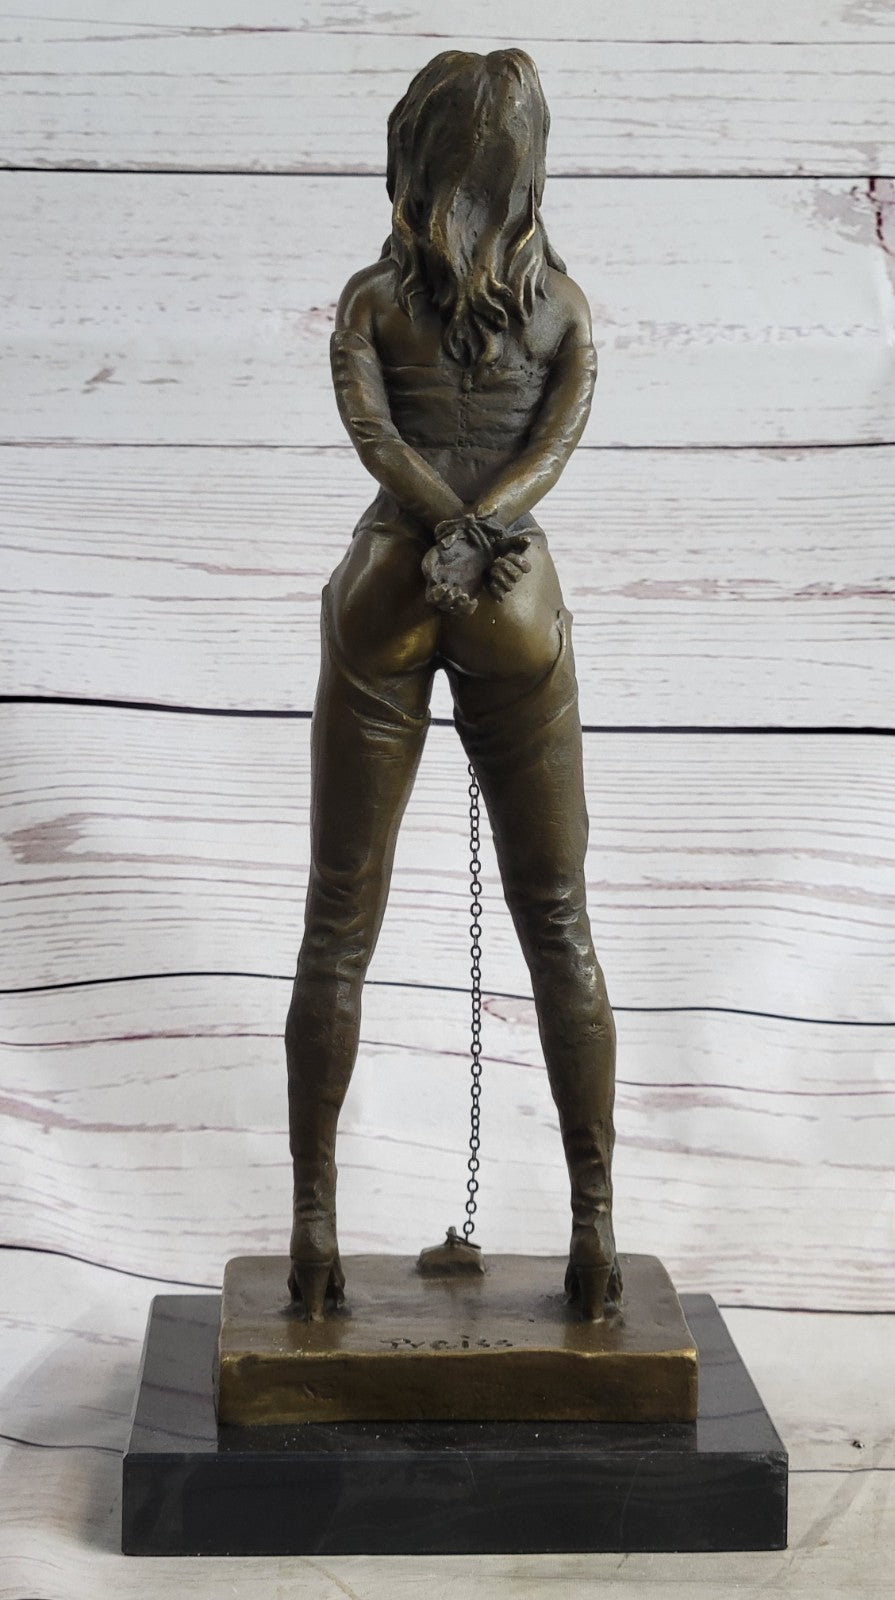 Handcrafted bronze sculpture SALE Marble Girl Nude Woman Erotic Preiss Signed